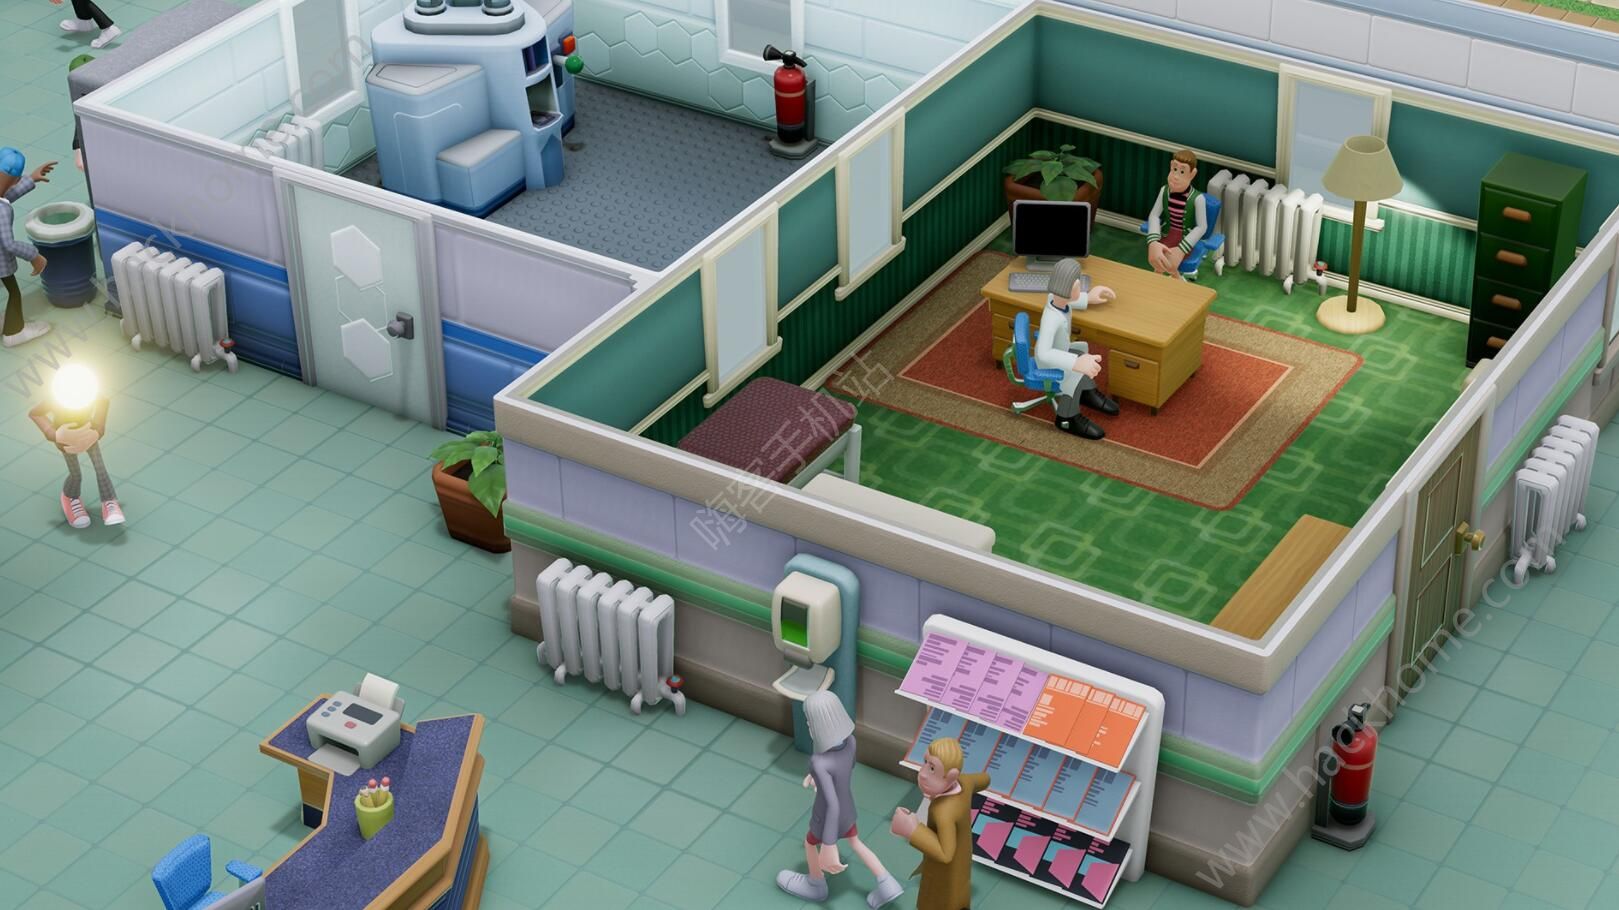 two point hospital free